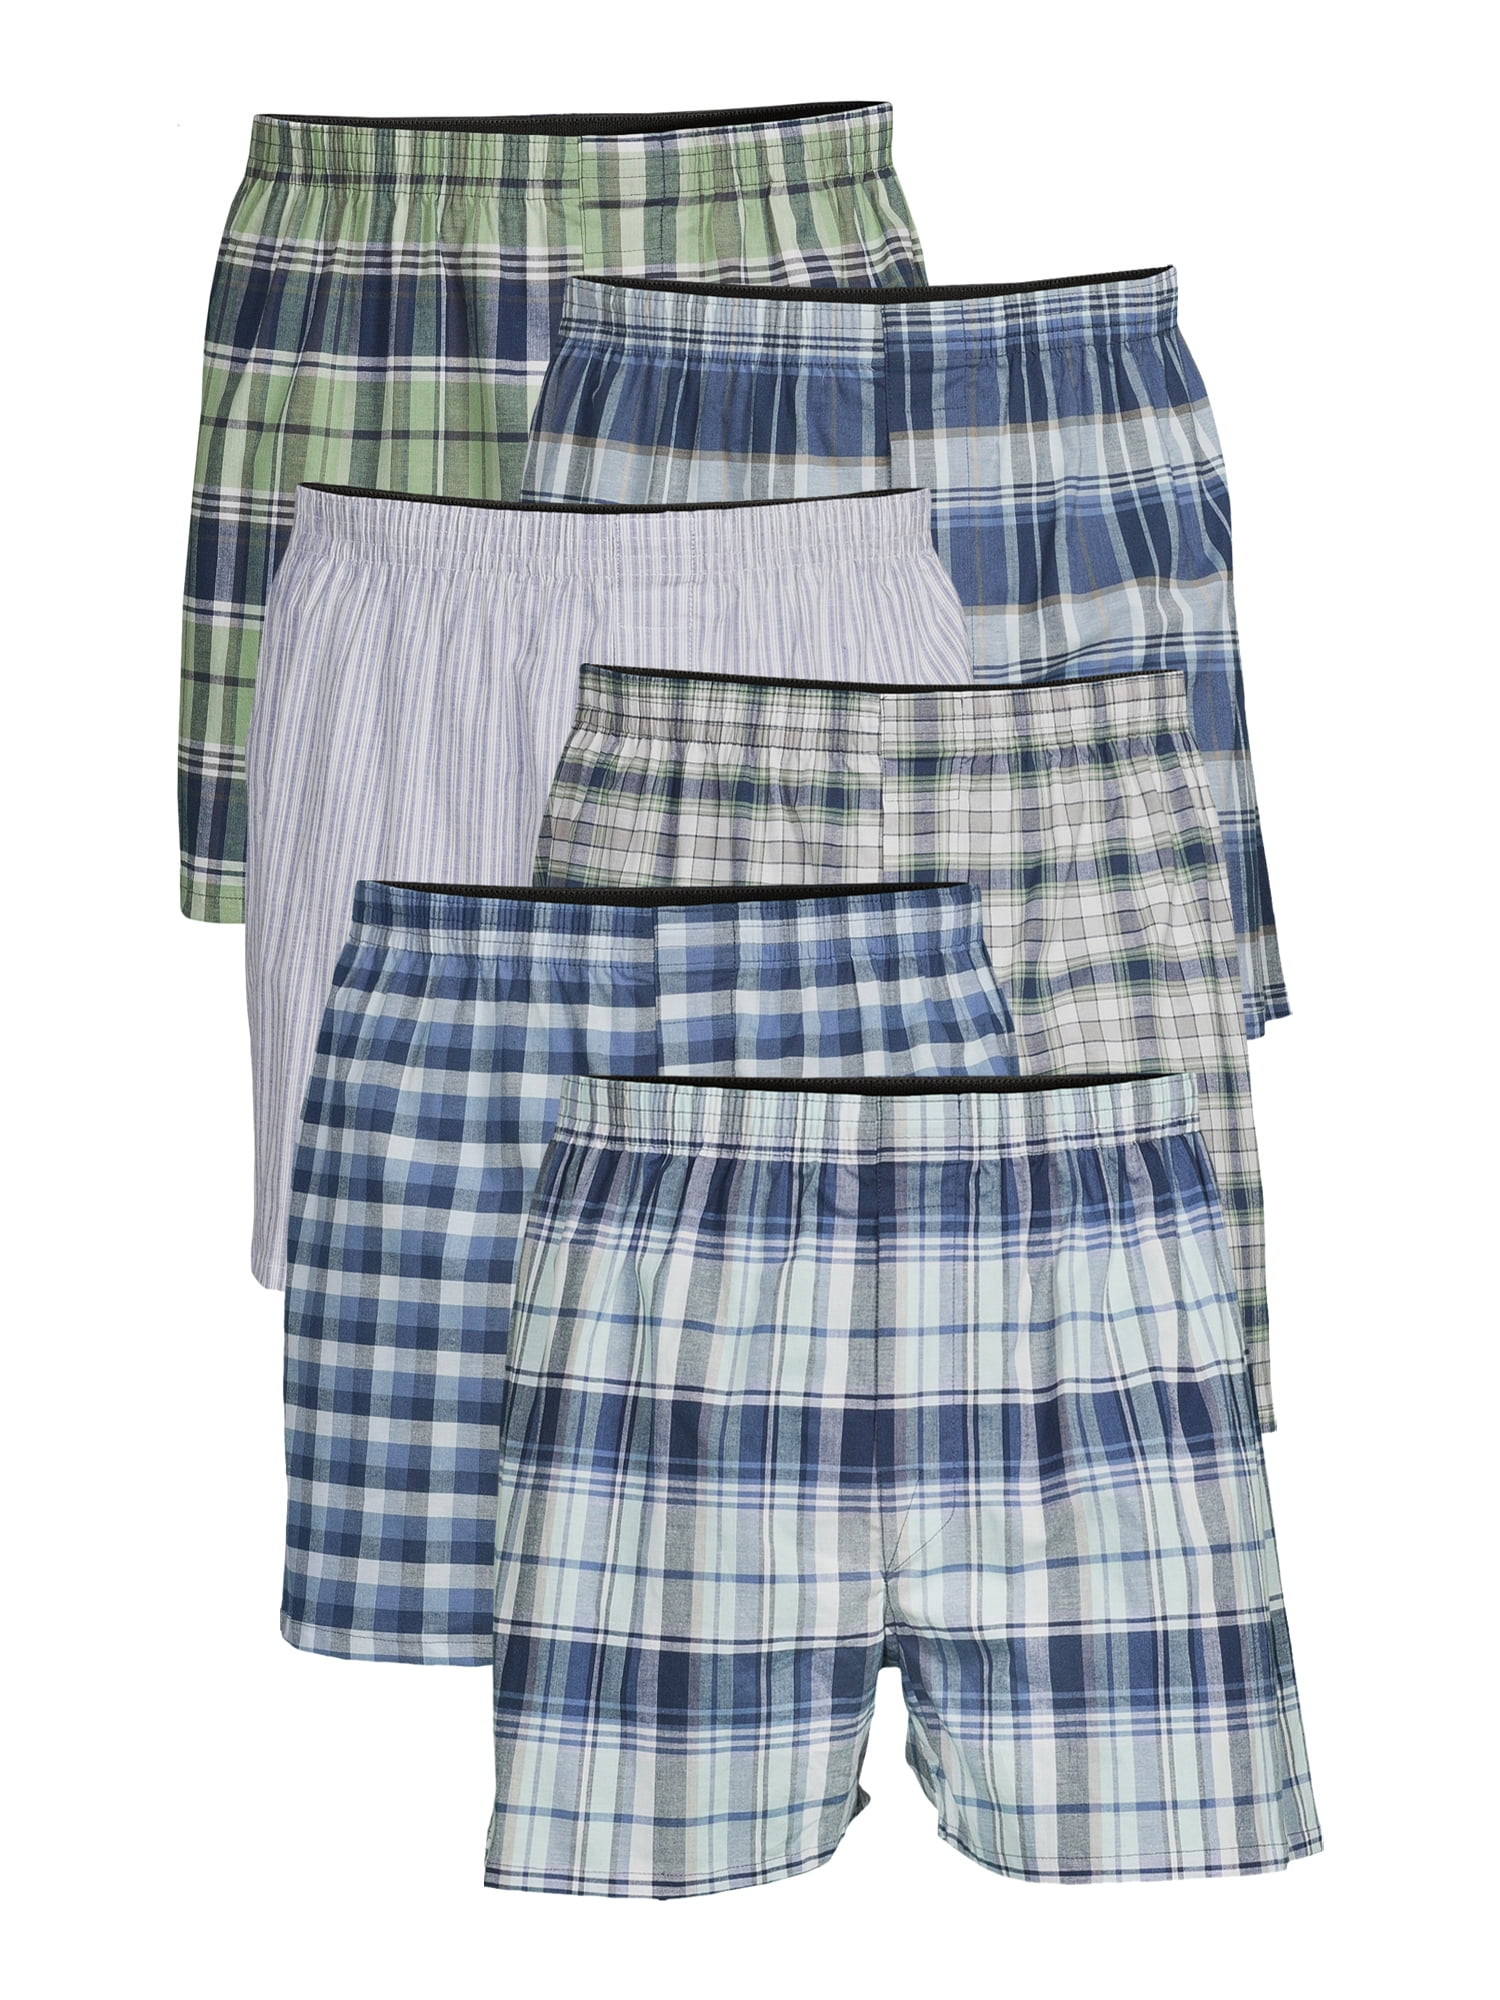 Jos. A. Bank Plaid Woven Boxers, 2- Pack - Big & Tall - Memorial Day Deals